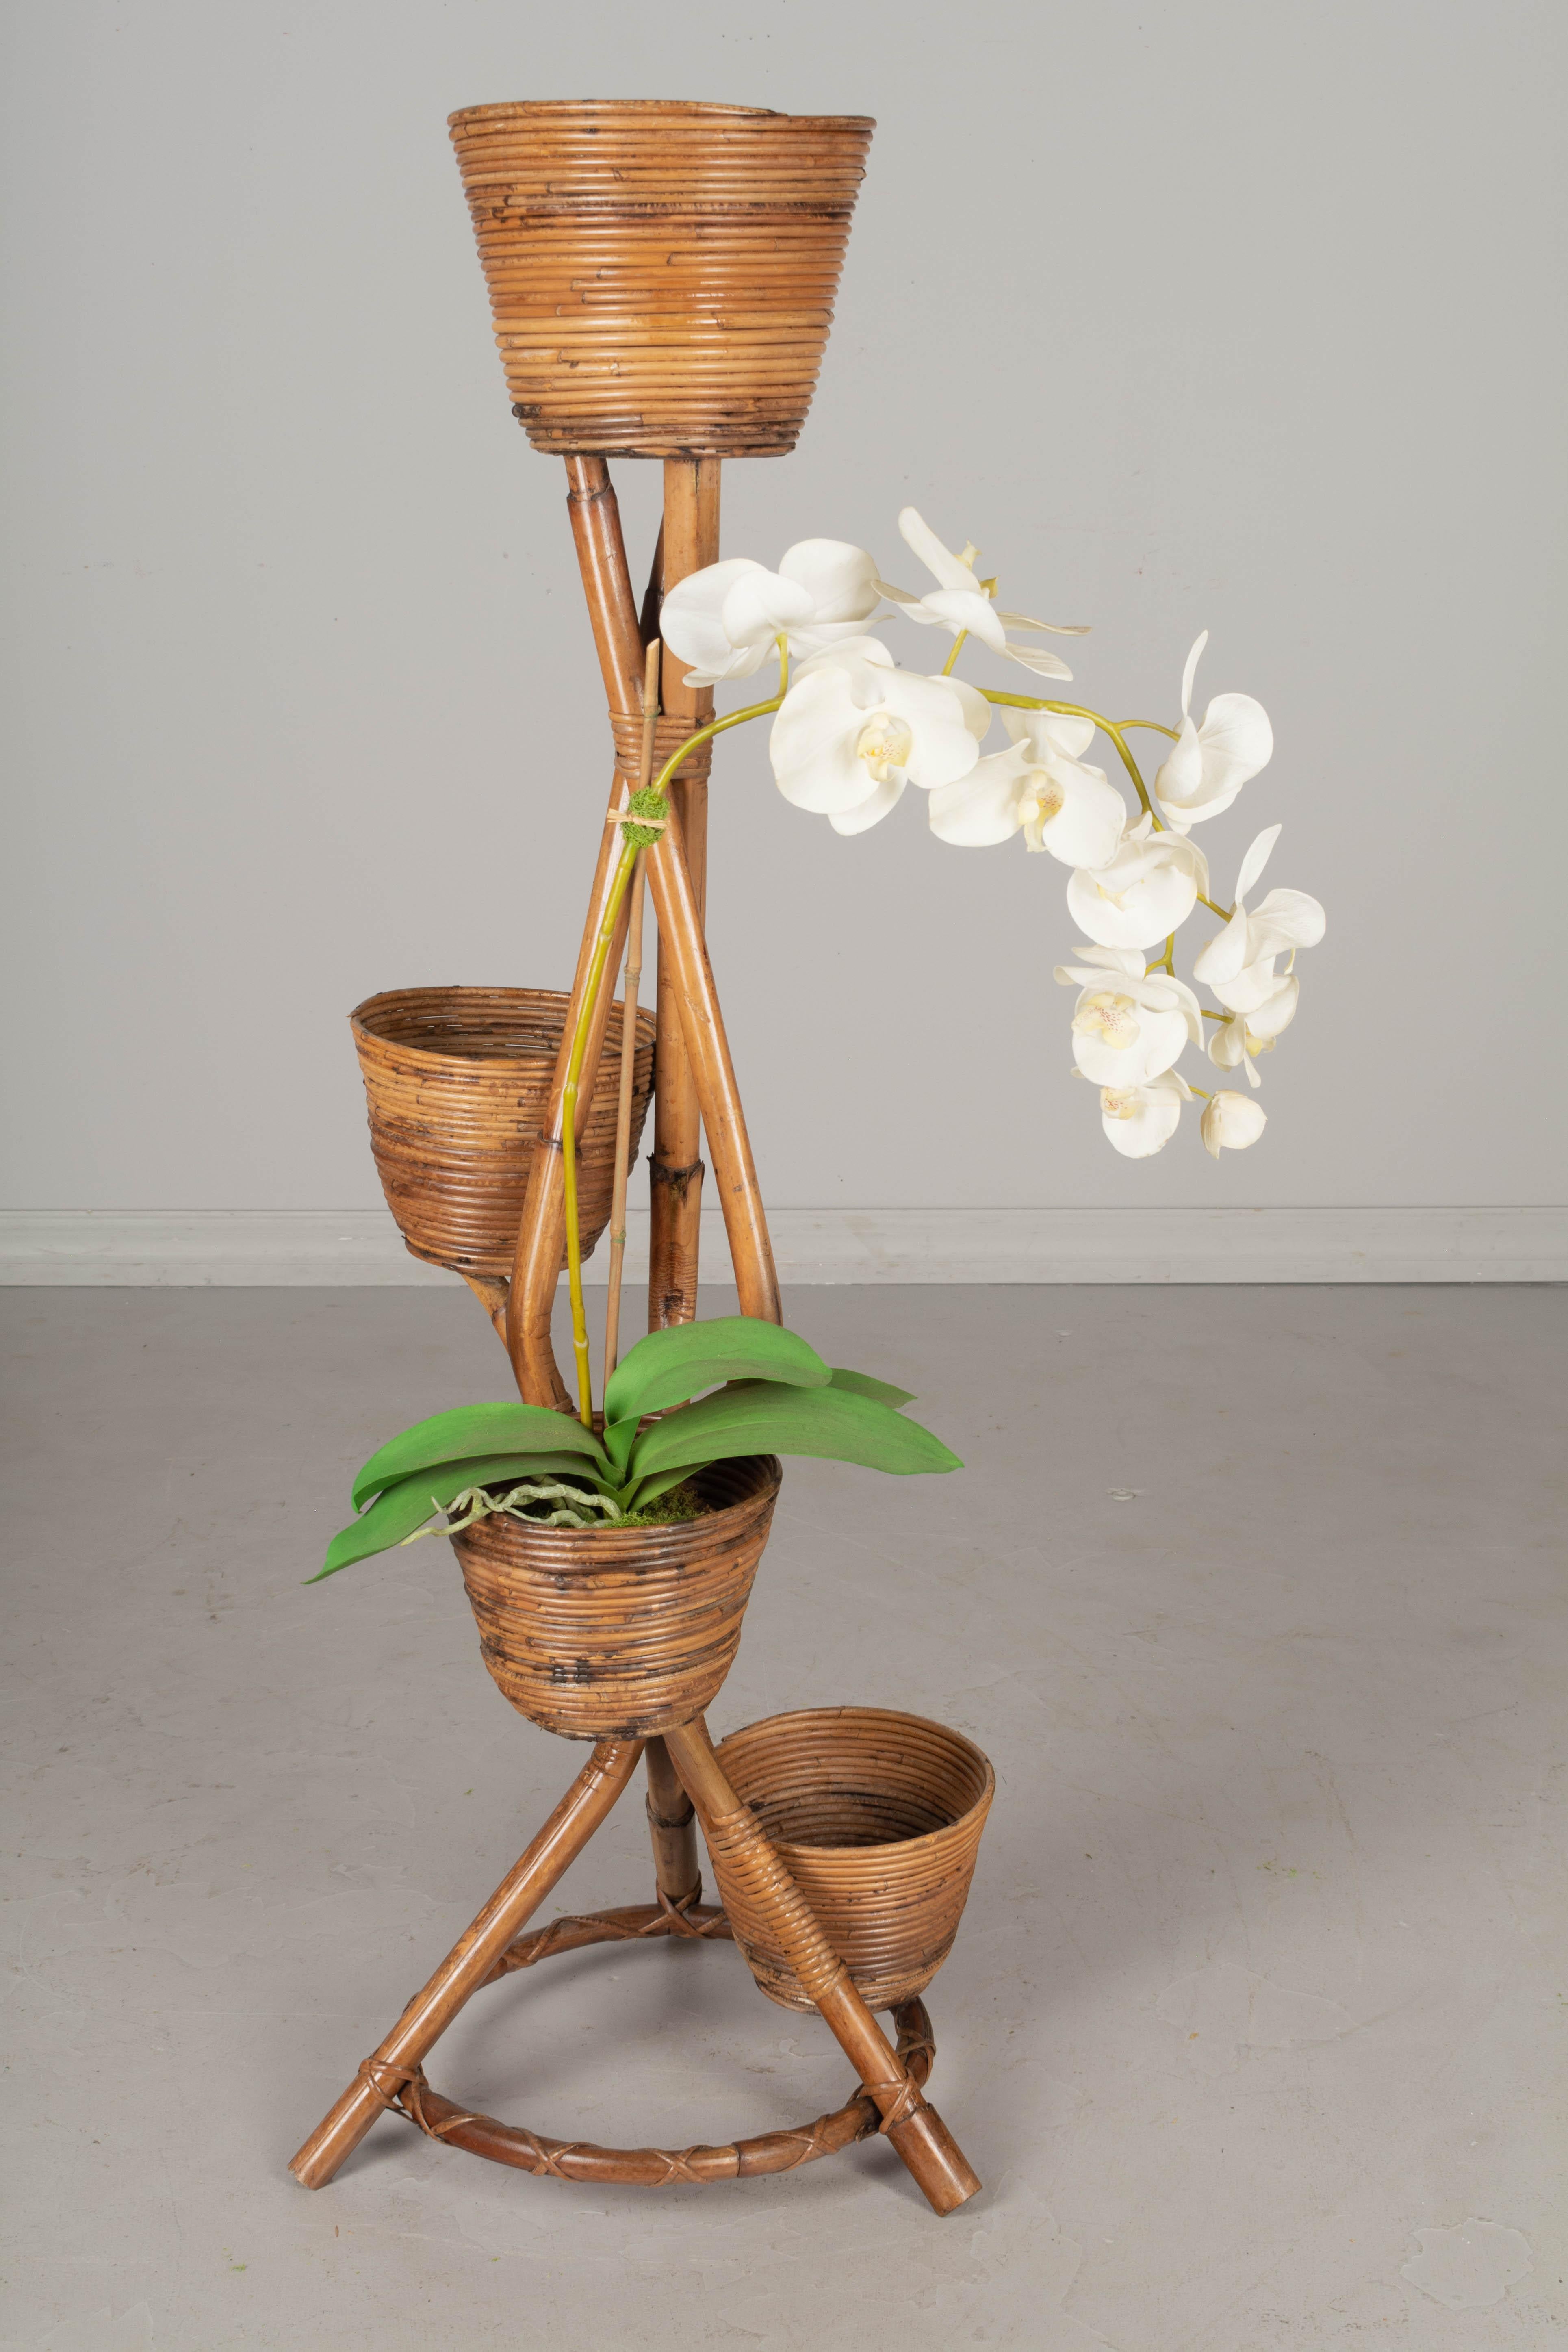 A Mid Century French bamboo and rattan plant or flower stand. Sturdy and in good condition. Perfect for the display of orchids or ferns. We have a large collection of rattan furniture from the French Riviera.
Contact us for a competitive shipping